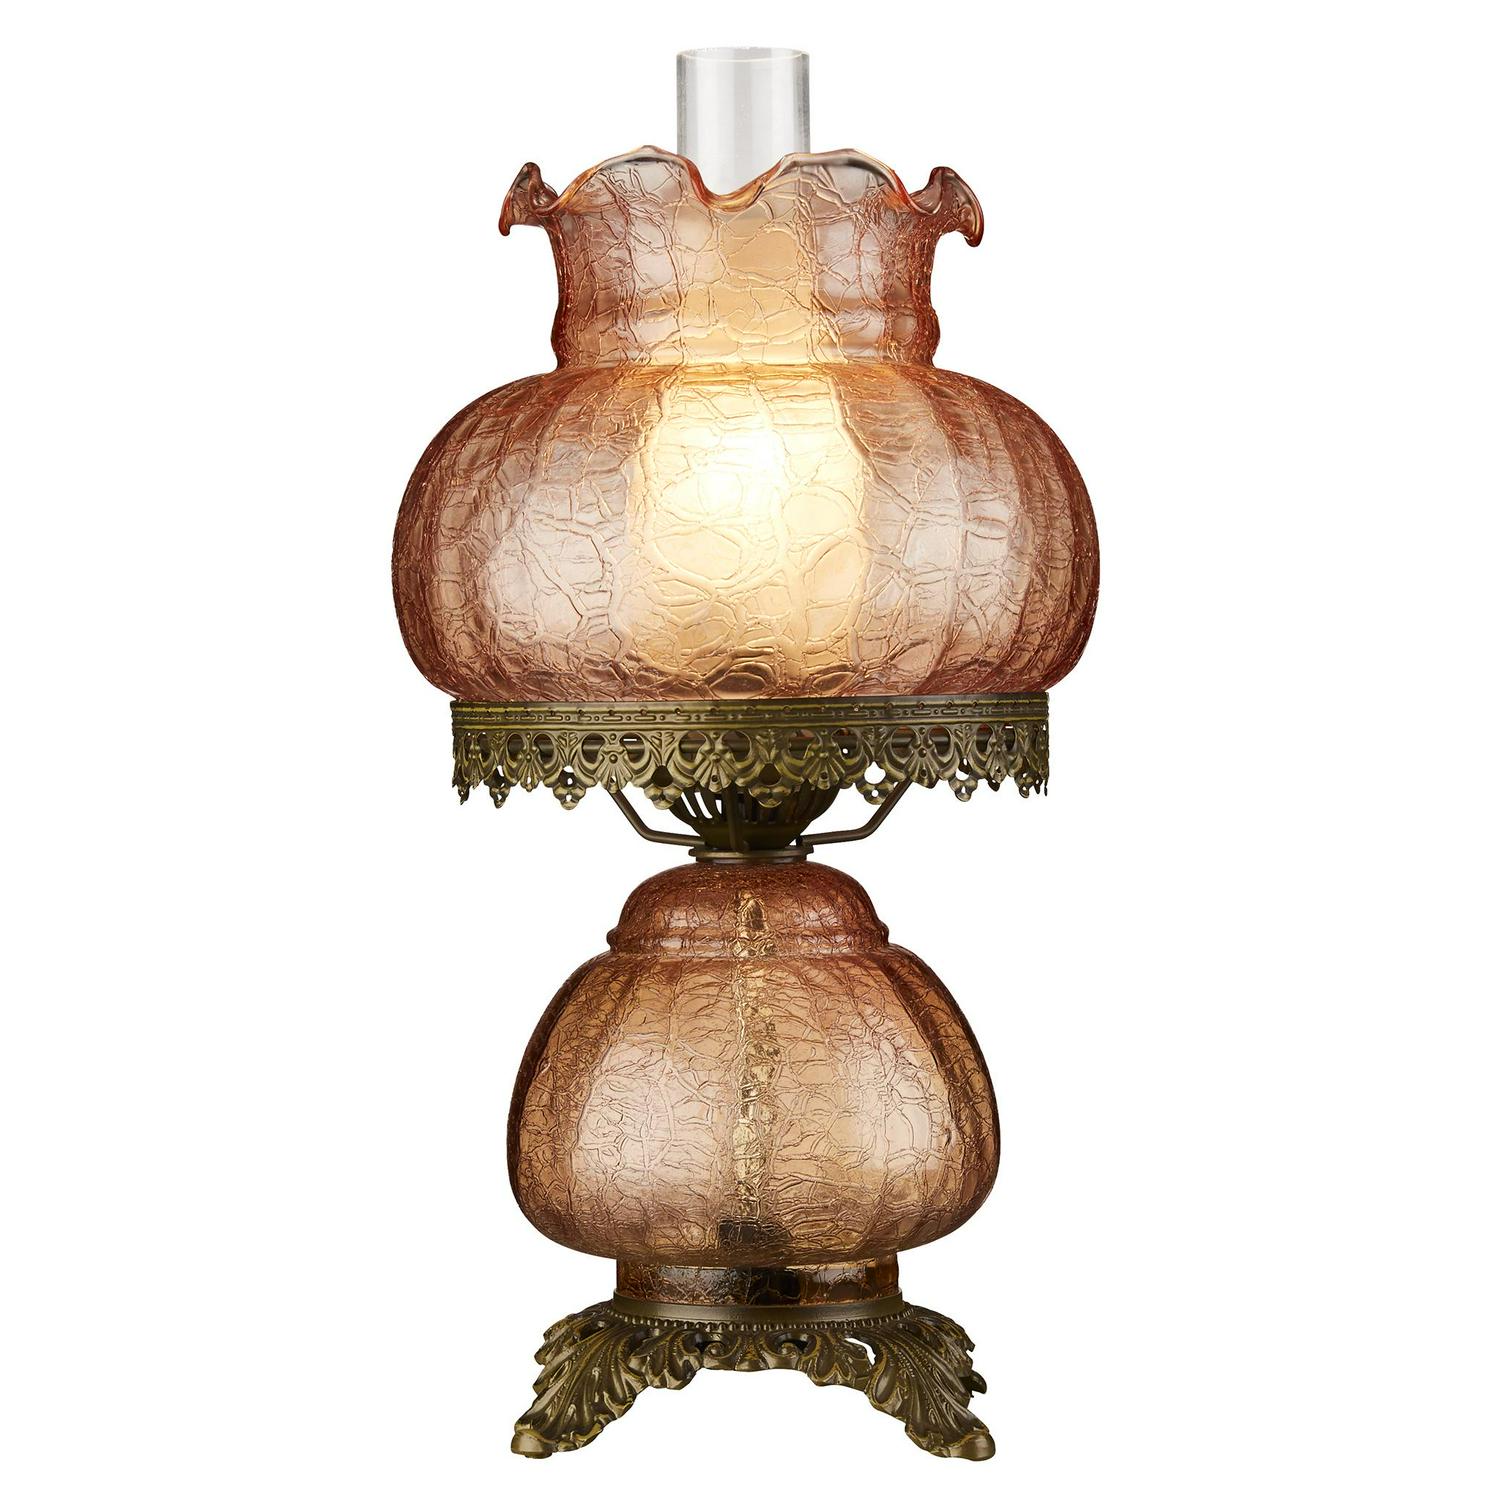 Design Toscano Rose Court Victorian-Style Hurricane Table Lamp